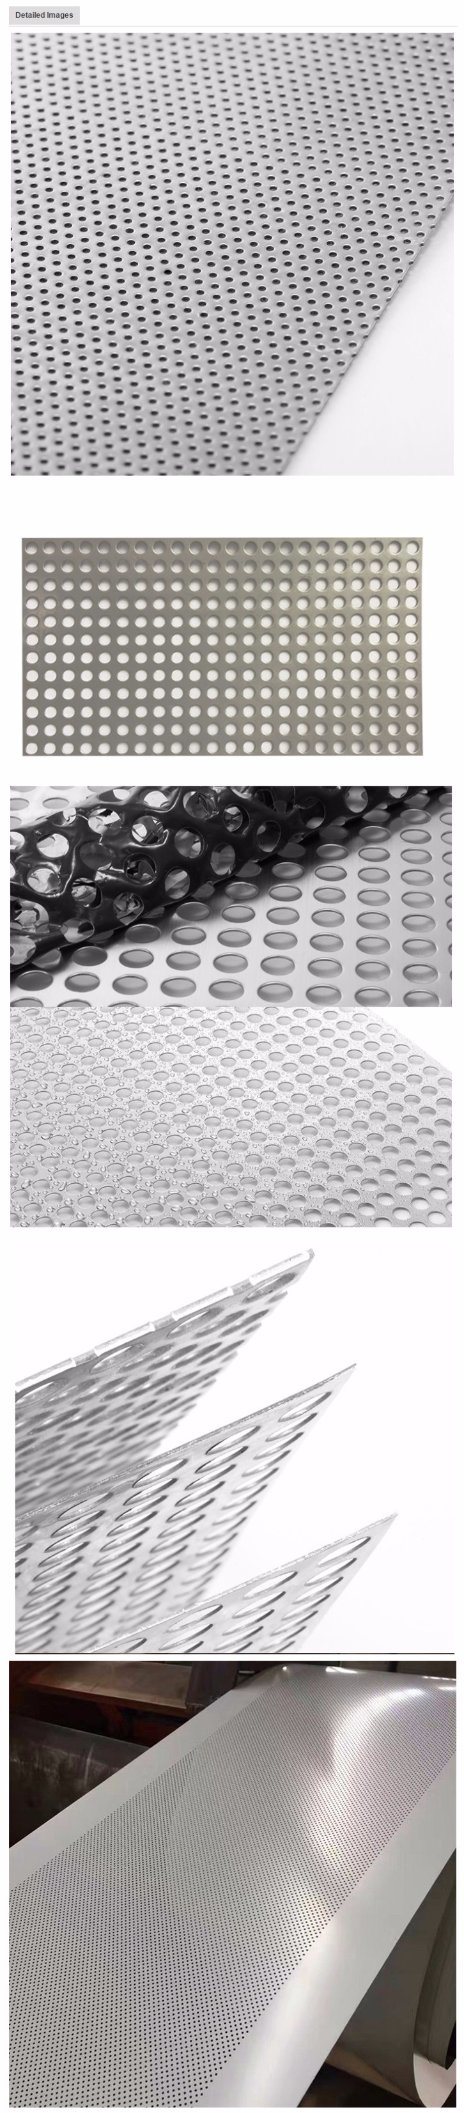 Perforated Acoustic Ceiling Tiles Punched Sound Proof Metal Plate/Sheet